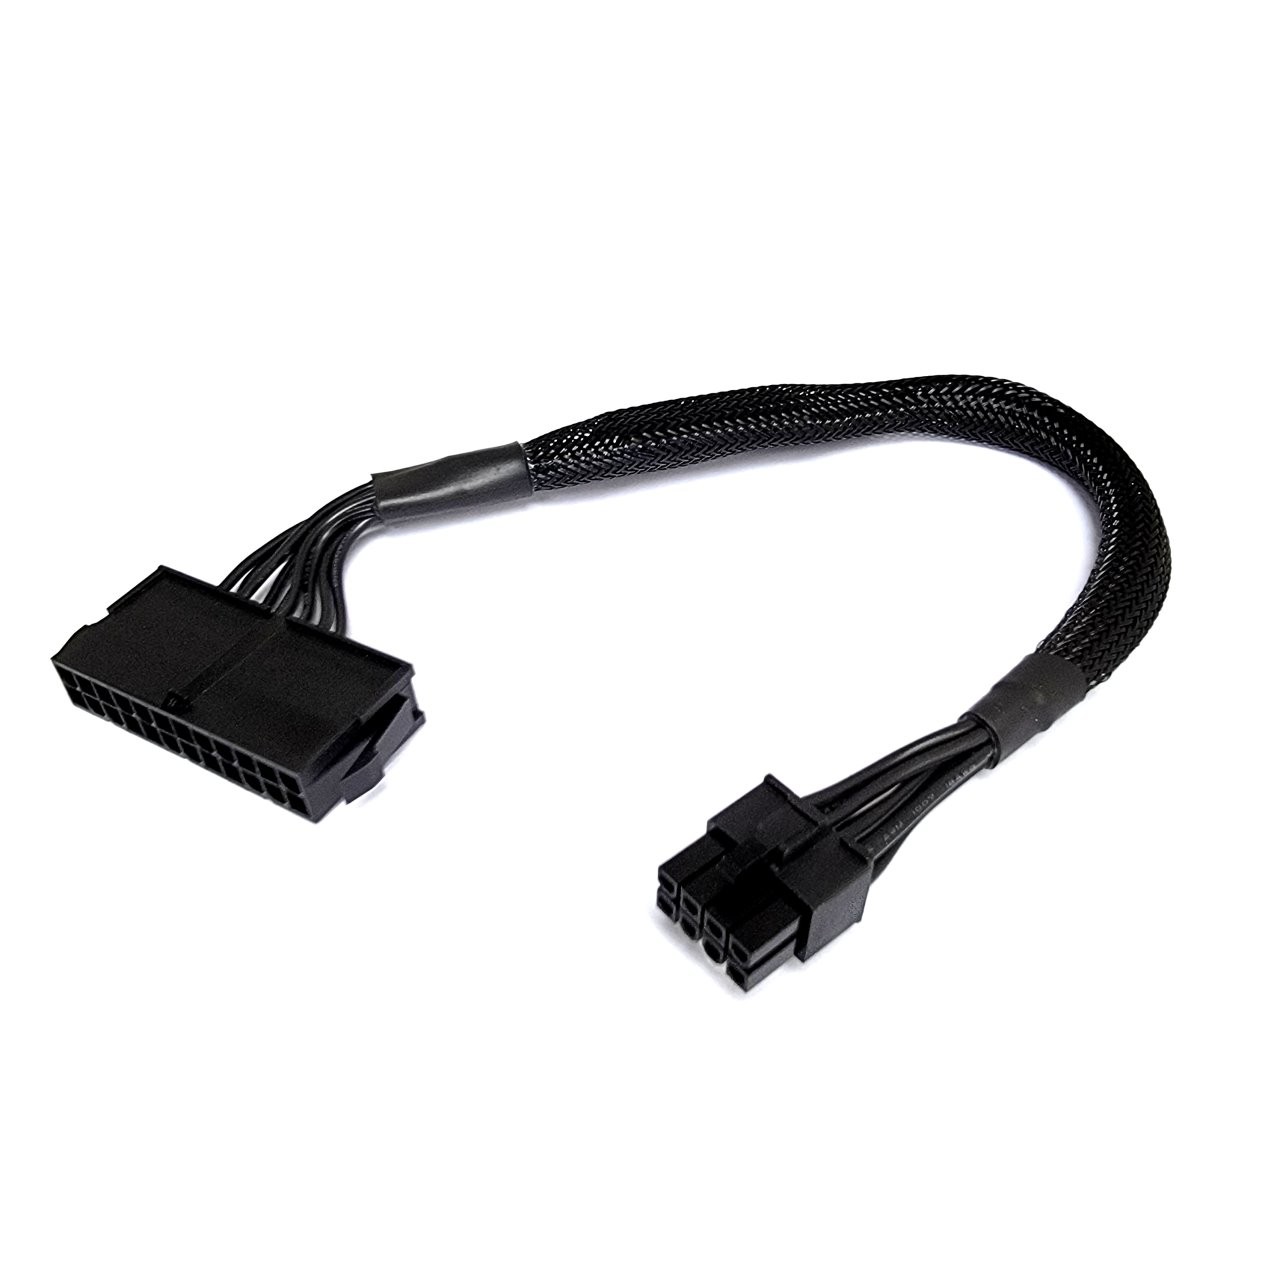 Dell OptiPlex 7020 PSU Main Power 24 Pin to 8 Pin Adapter Cable 30cm -  